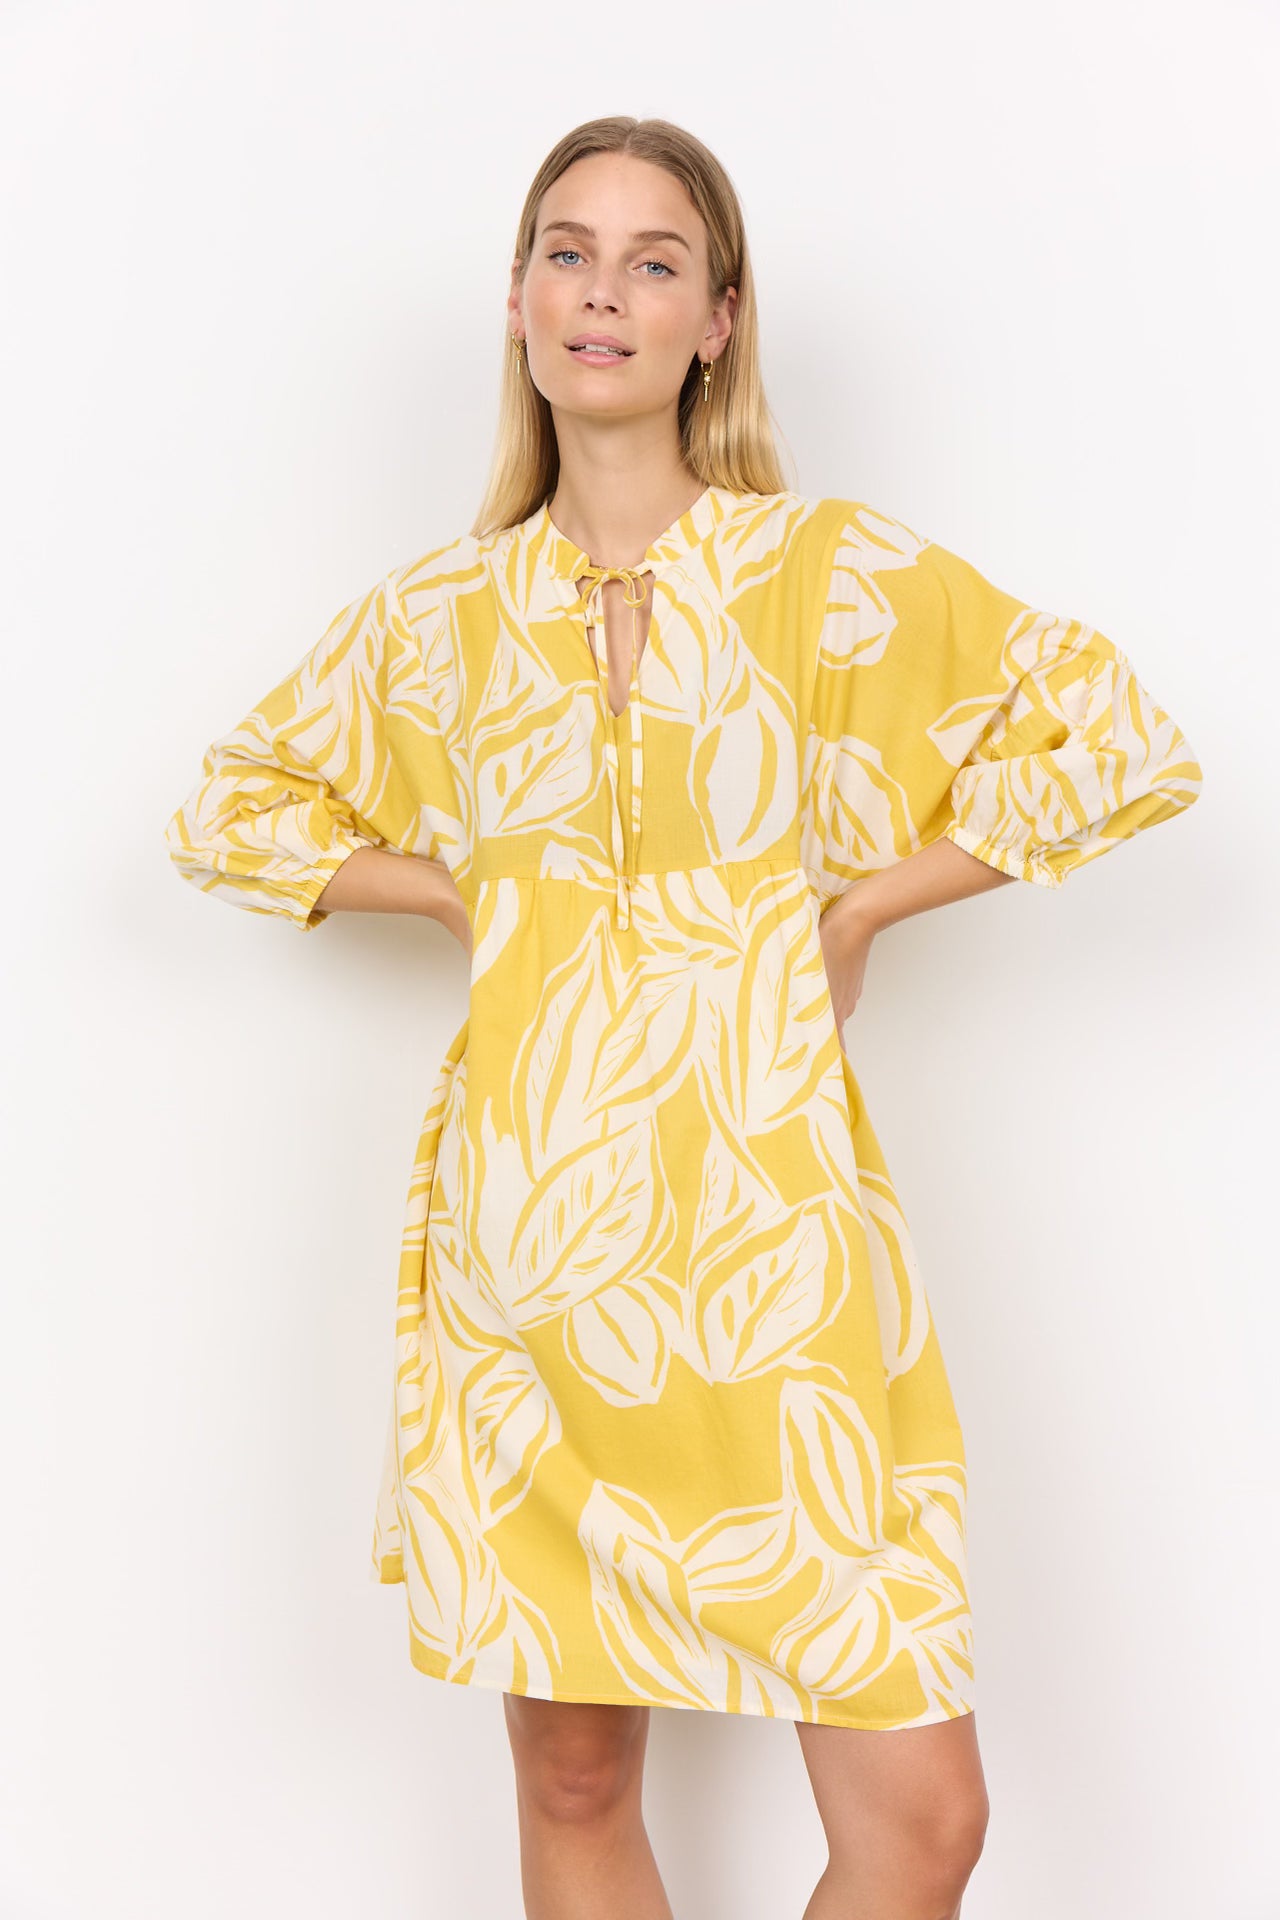 Soya Concept - Yellow Baby Doll Dress